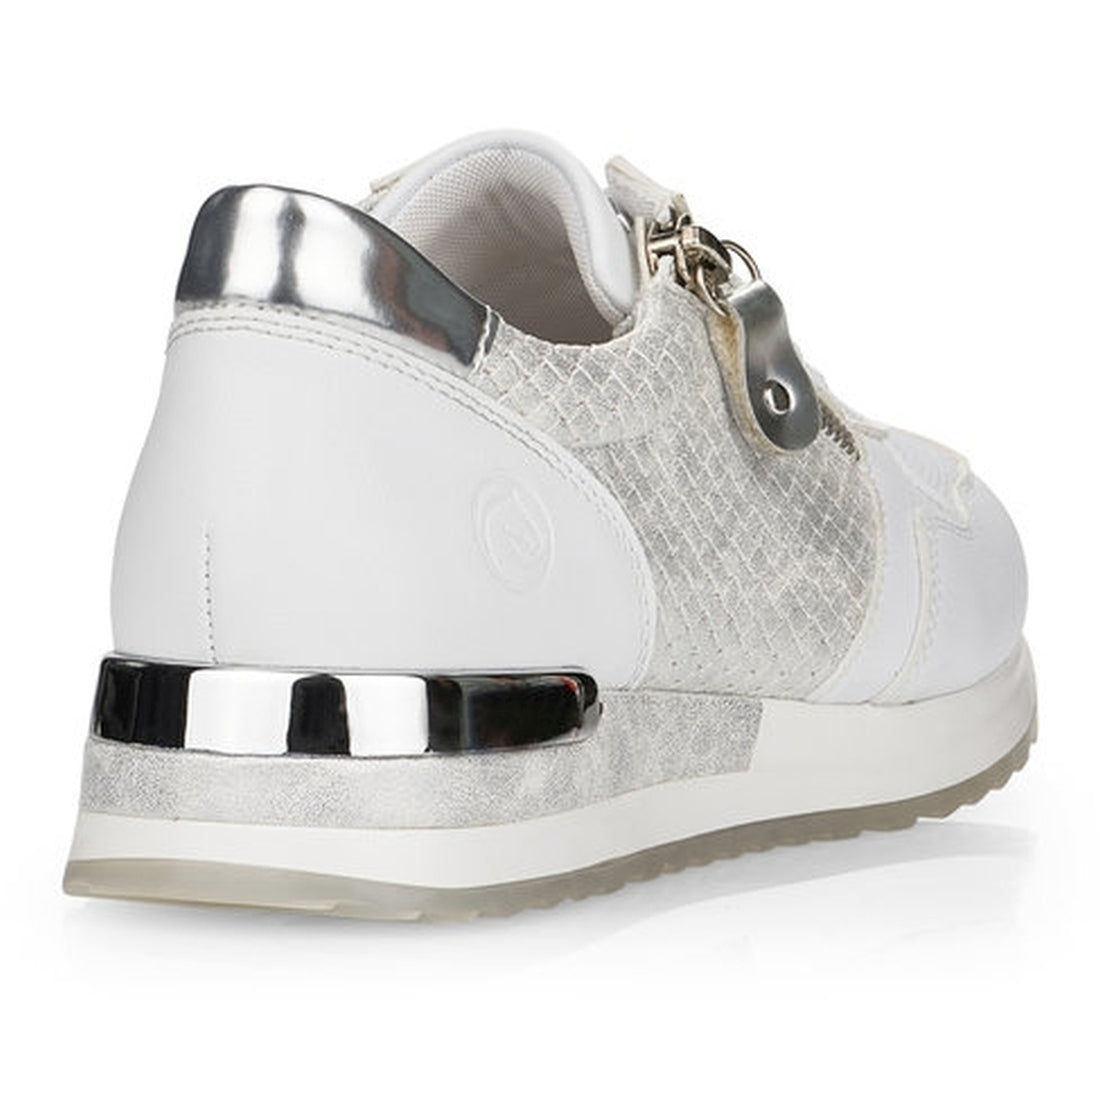 Remonte Womens weiss casual closed shoes | Vilbury London